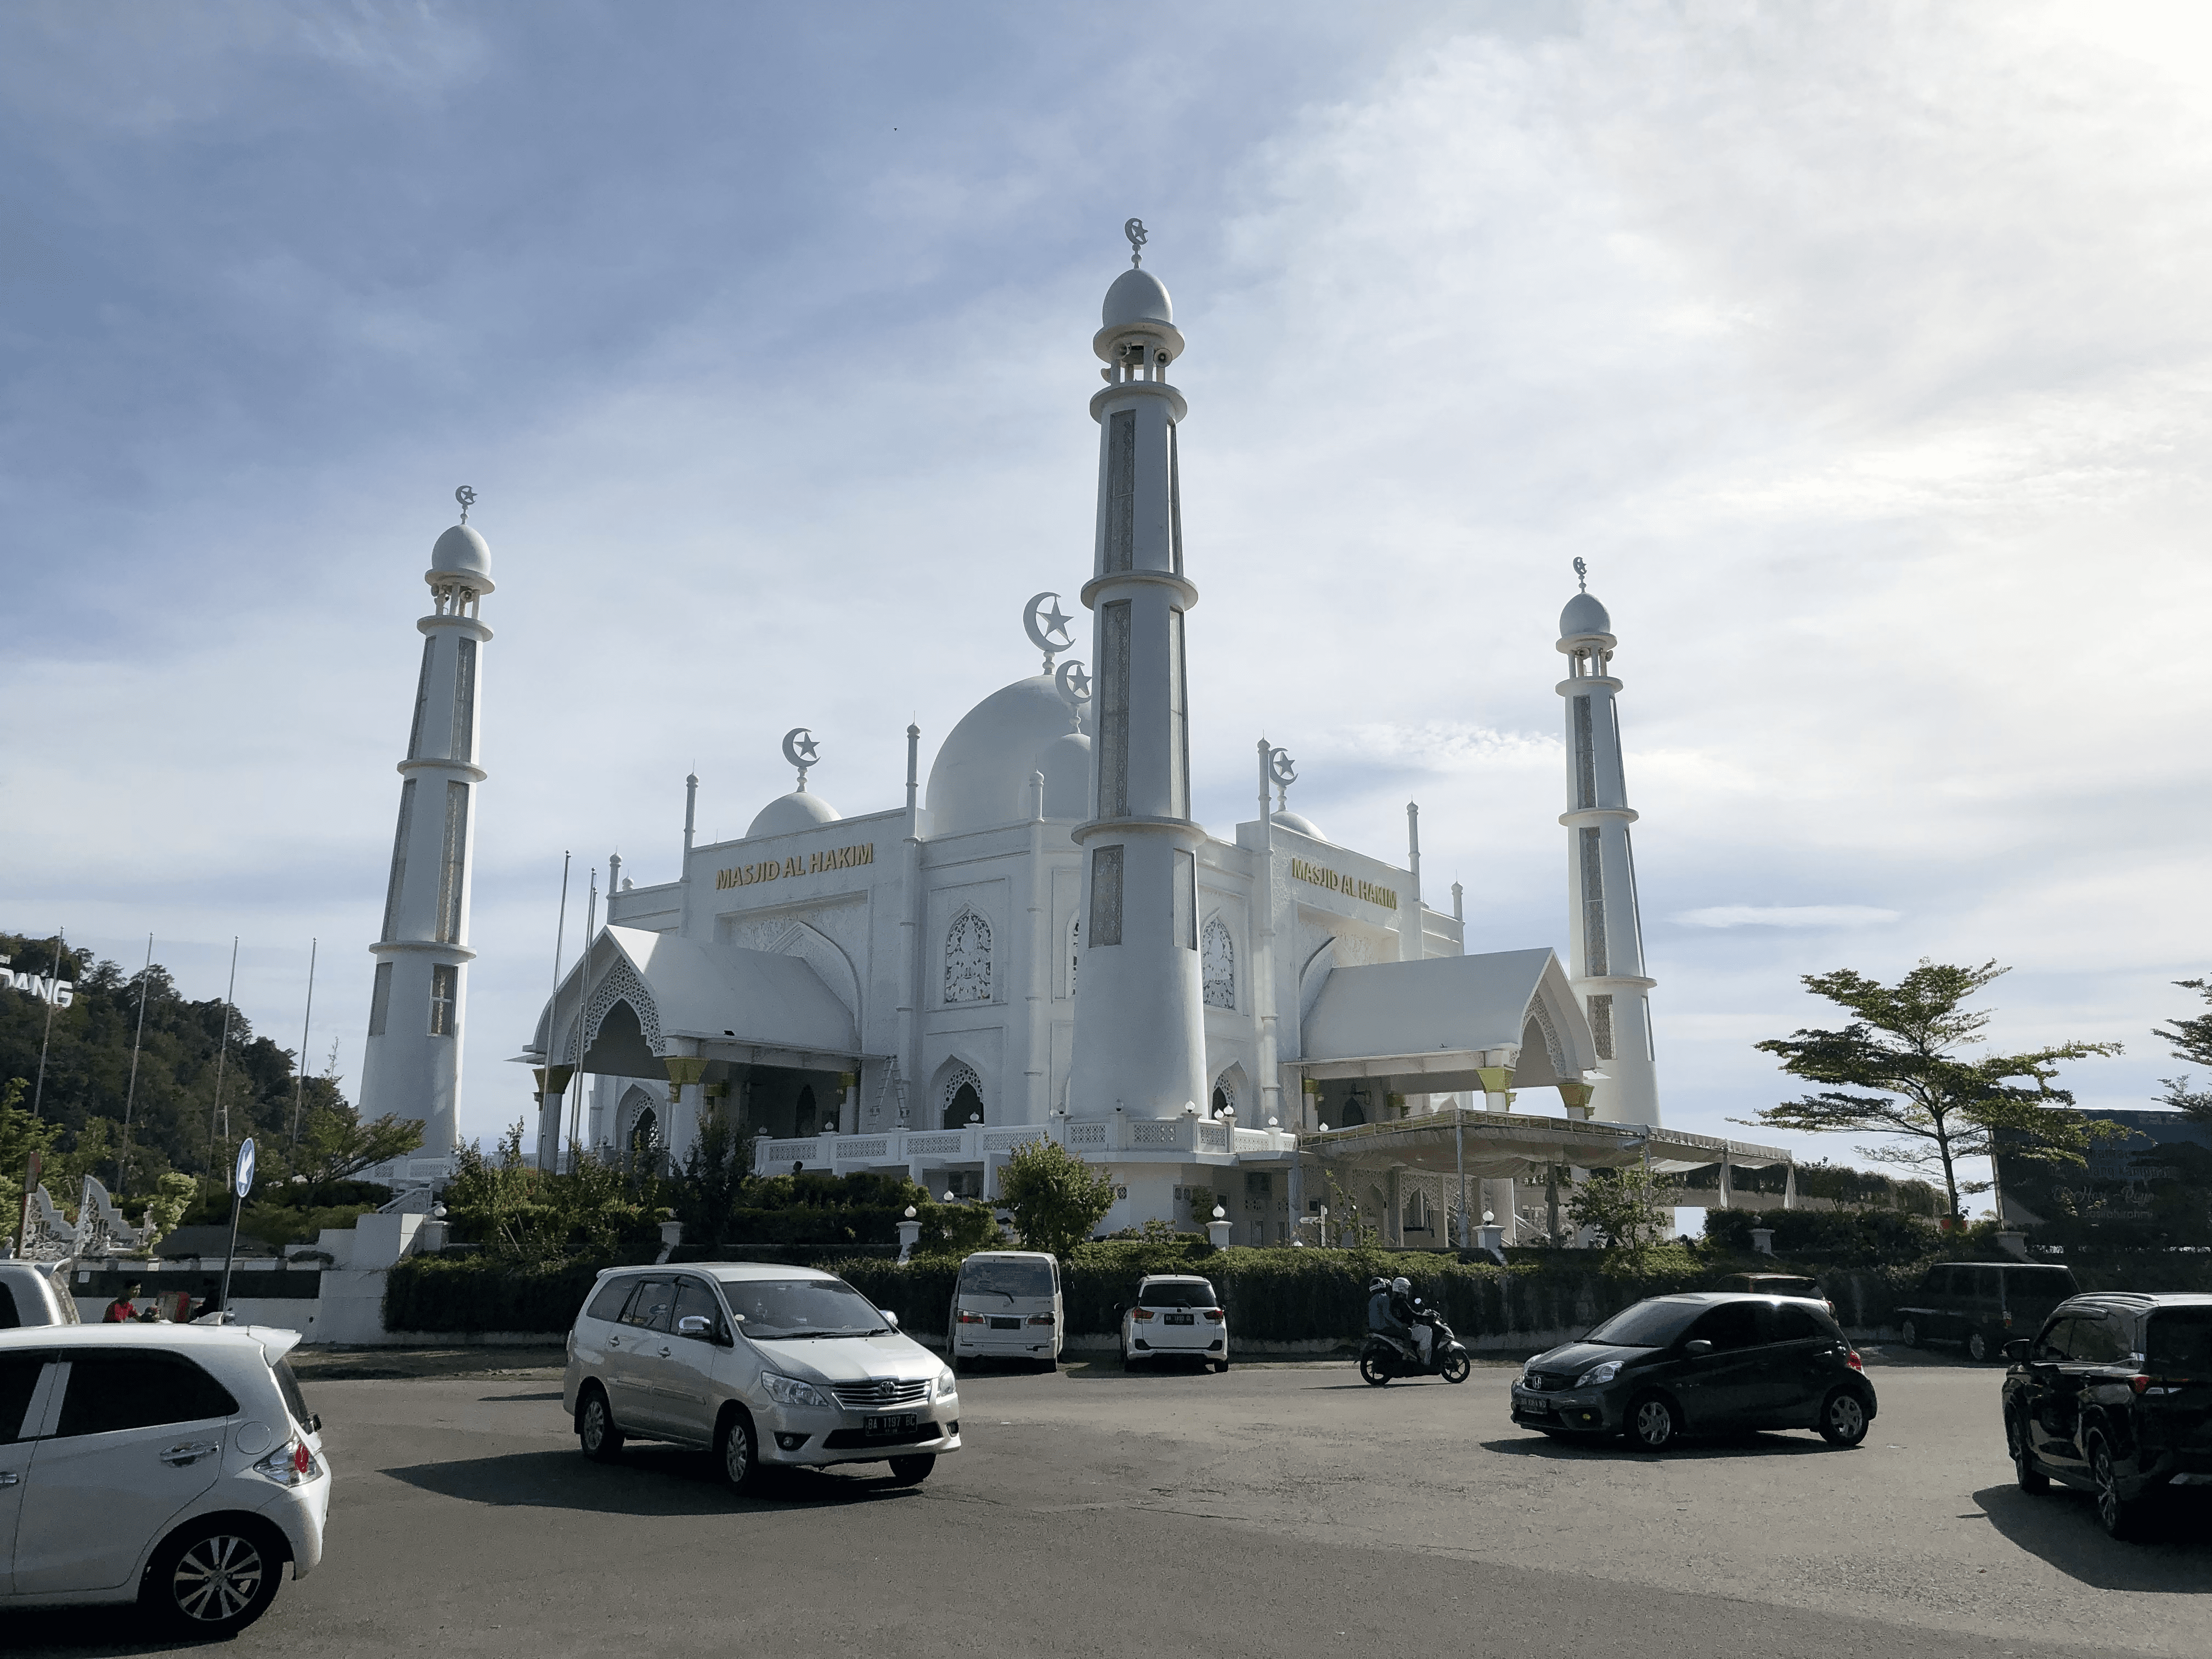 Masjid Al-Hakim, a relatively new mosque in Padang, overlooks the beach and a major tourist, business, and residential area.